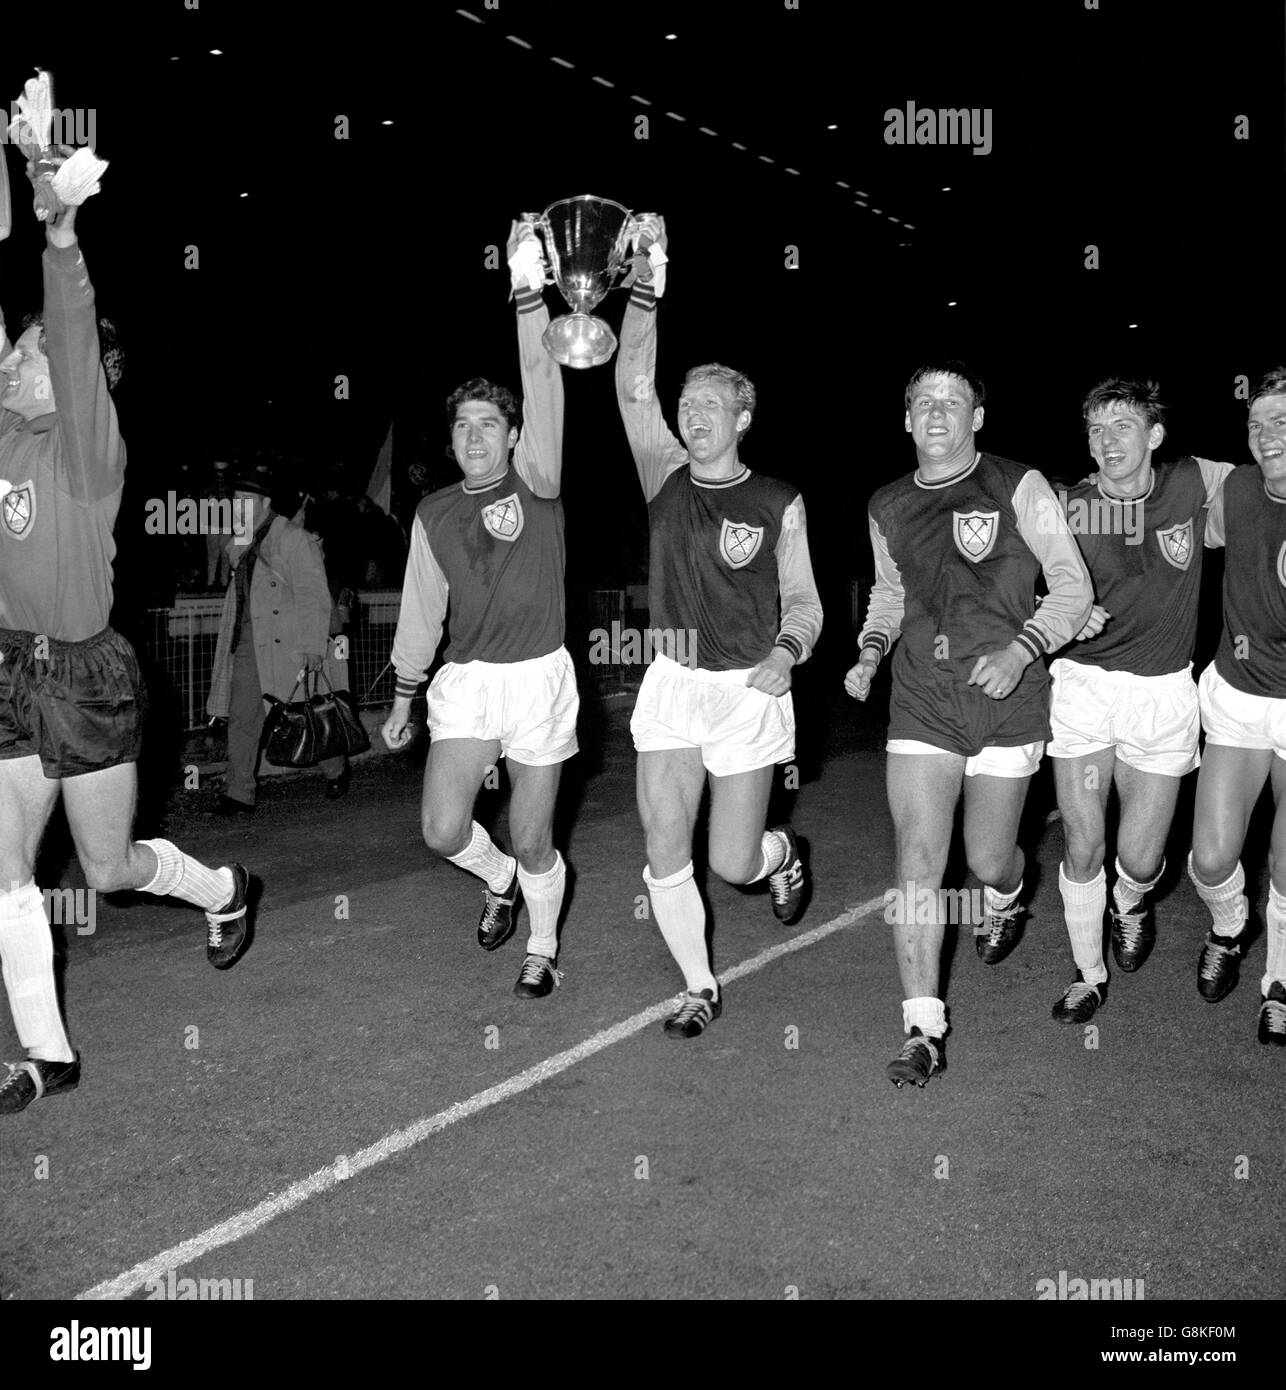 West Ham United A. Sealey, who scored both goals and West Ham captain Bobby Moore, hold high the trophy after beating TSV Munchen 2-0 in the final of the European Cup Winners Cup at Weembley. Stock Photo